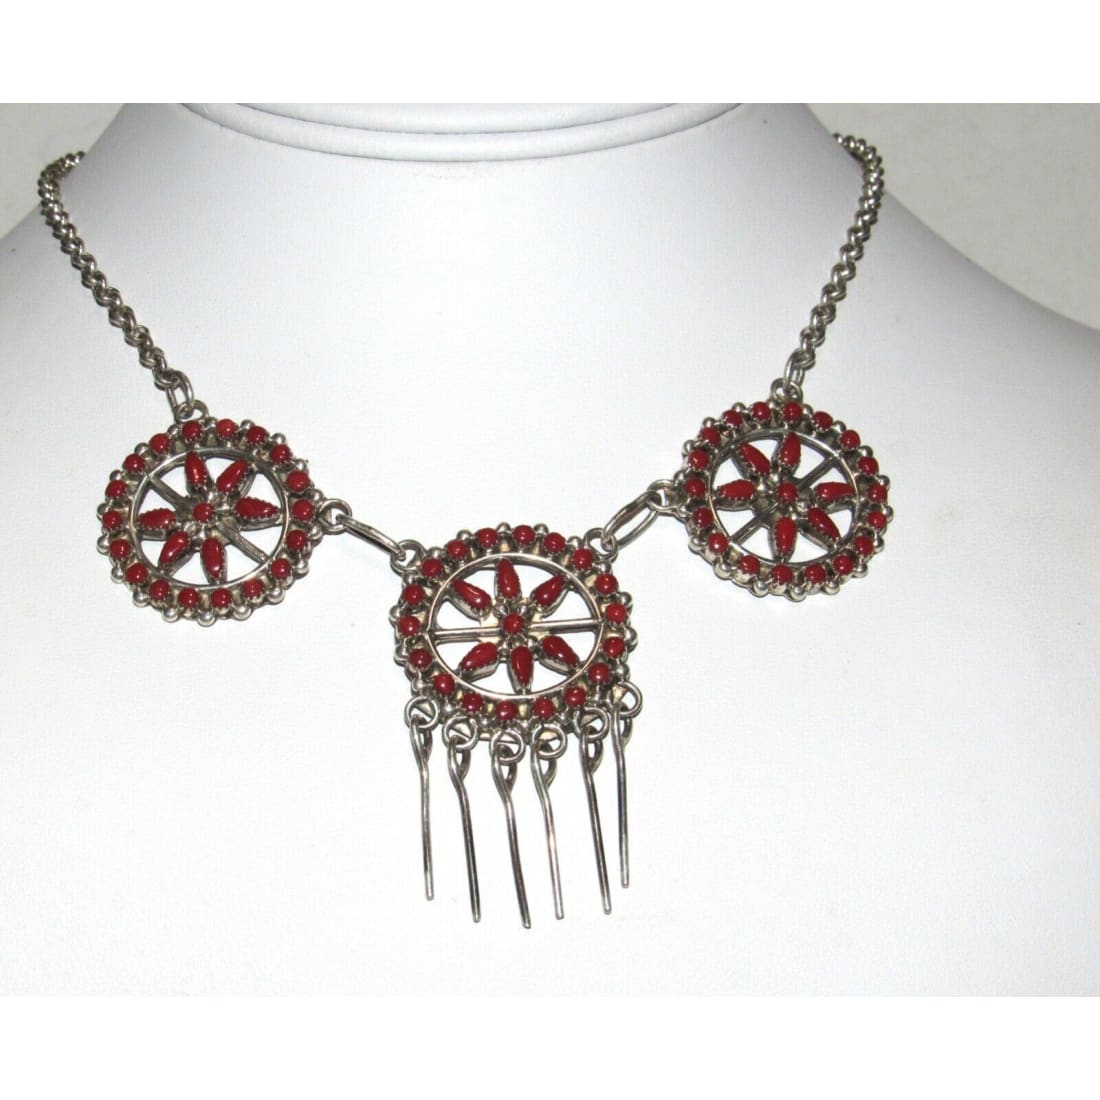 VTG Zuni Coral Necklace and Earrings Set Sterling Silver 